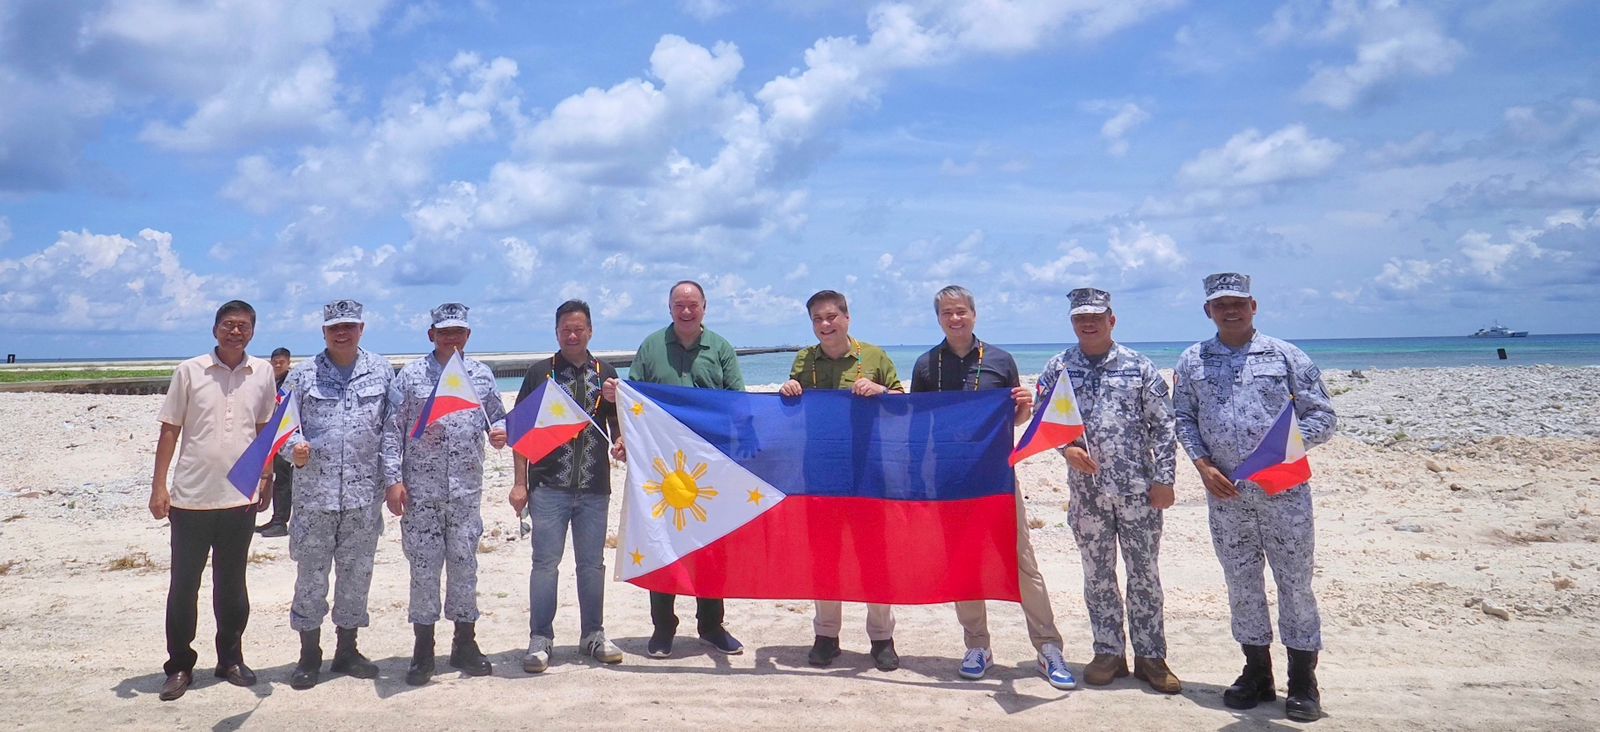 Senate President Migz Zubiri leads a historic visit to Pag-asa Island for the groundbreaking of a Super Rural Health Unit for the municipality of Kalayaan and a barracks for the Philippine Navy. He is the highest-ranking government official to visit the island in recent years, as Pag-asa came to national prominence for its position in the West Philippine Sea. From left to right: Mayor Roberto del Mundo, Commodore Alan Javier, Vice Adm. Toribio Adaci, Sen. JV Ejercito, Defense Secretary Gibo Teodoro, Senate President Migz Zubiri, Majority Leader Joel Villanueva, Coast Guard Adm. Ronnie Gavan, Rear Adm. Alfonso Torres.